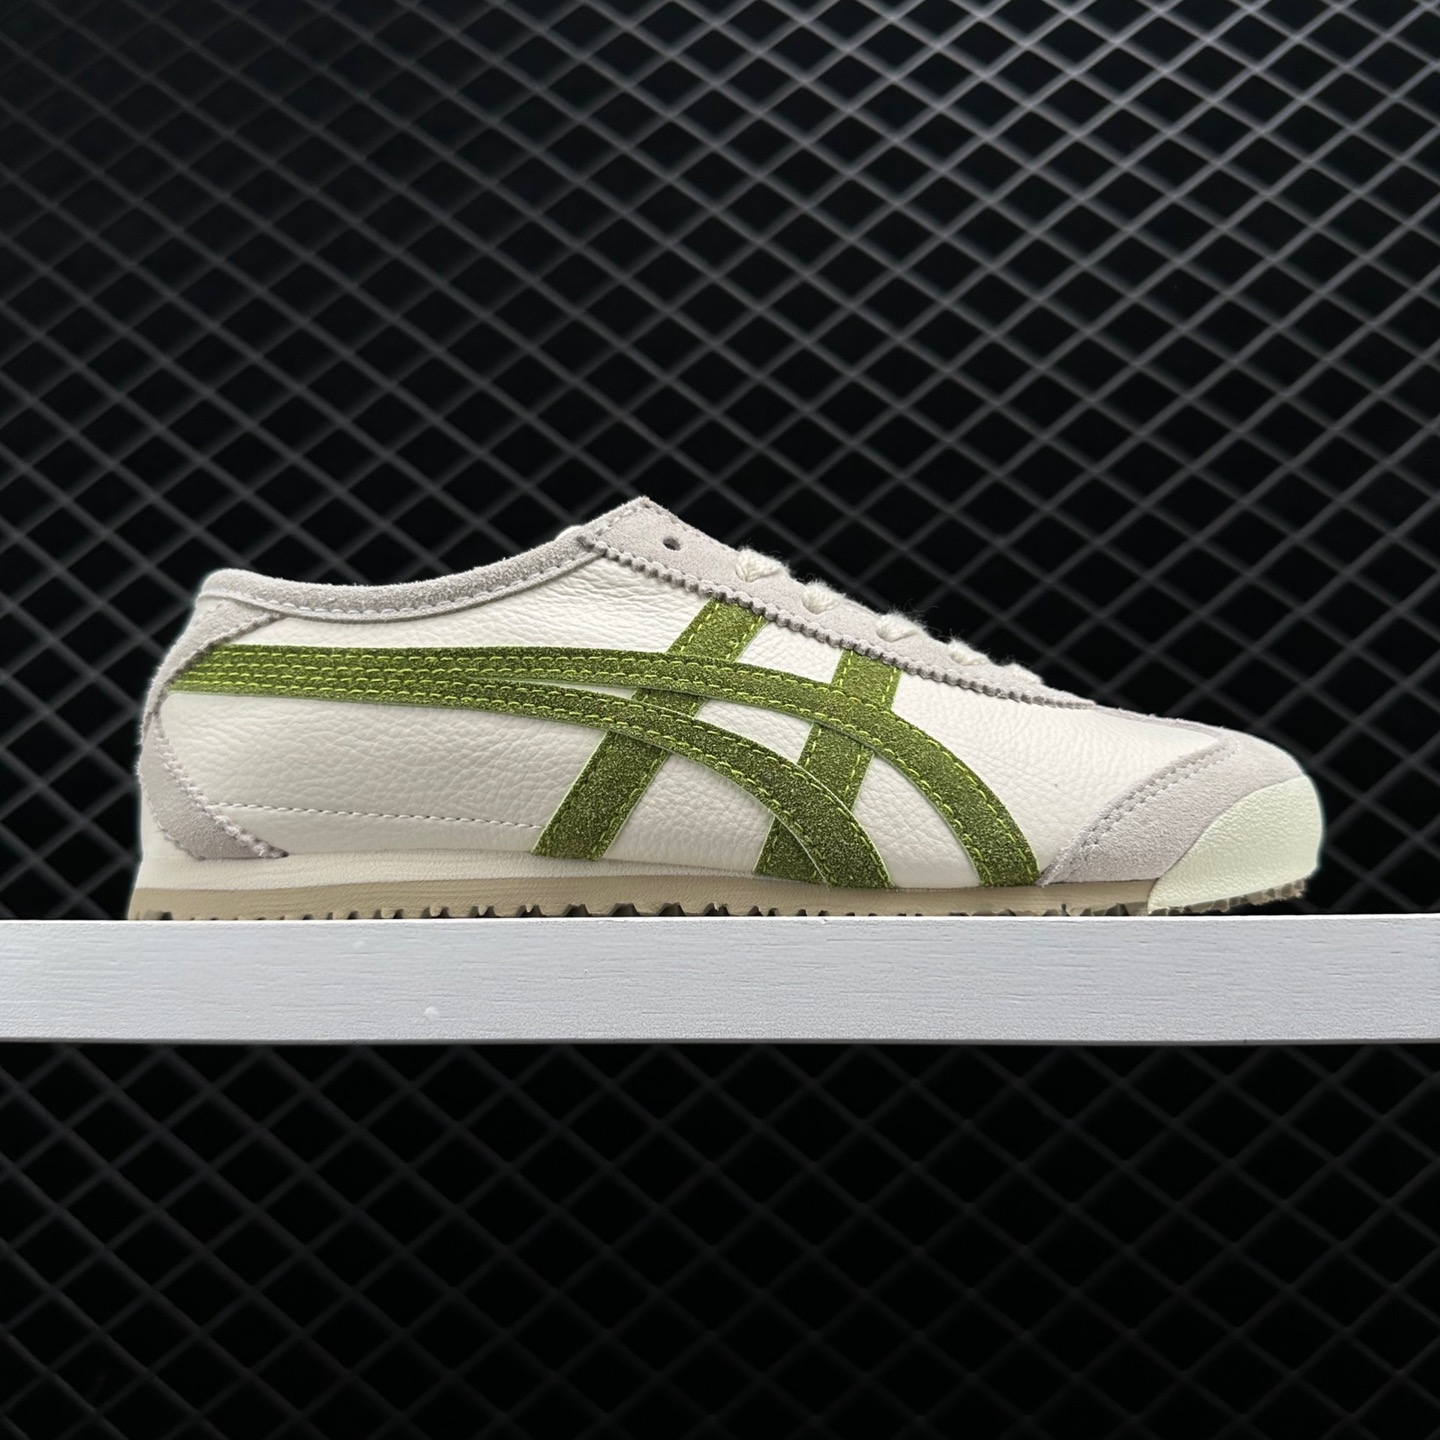 Onitsuka Mexico 66 Vin Birch Green | Classic and Stylish Sneakers